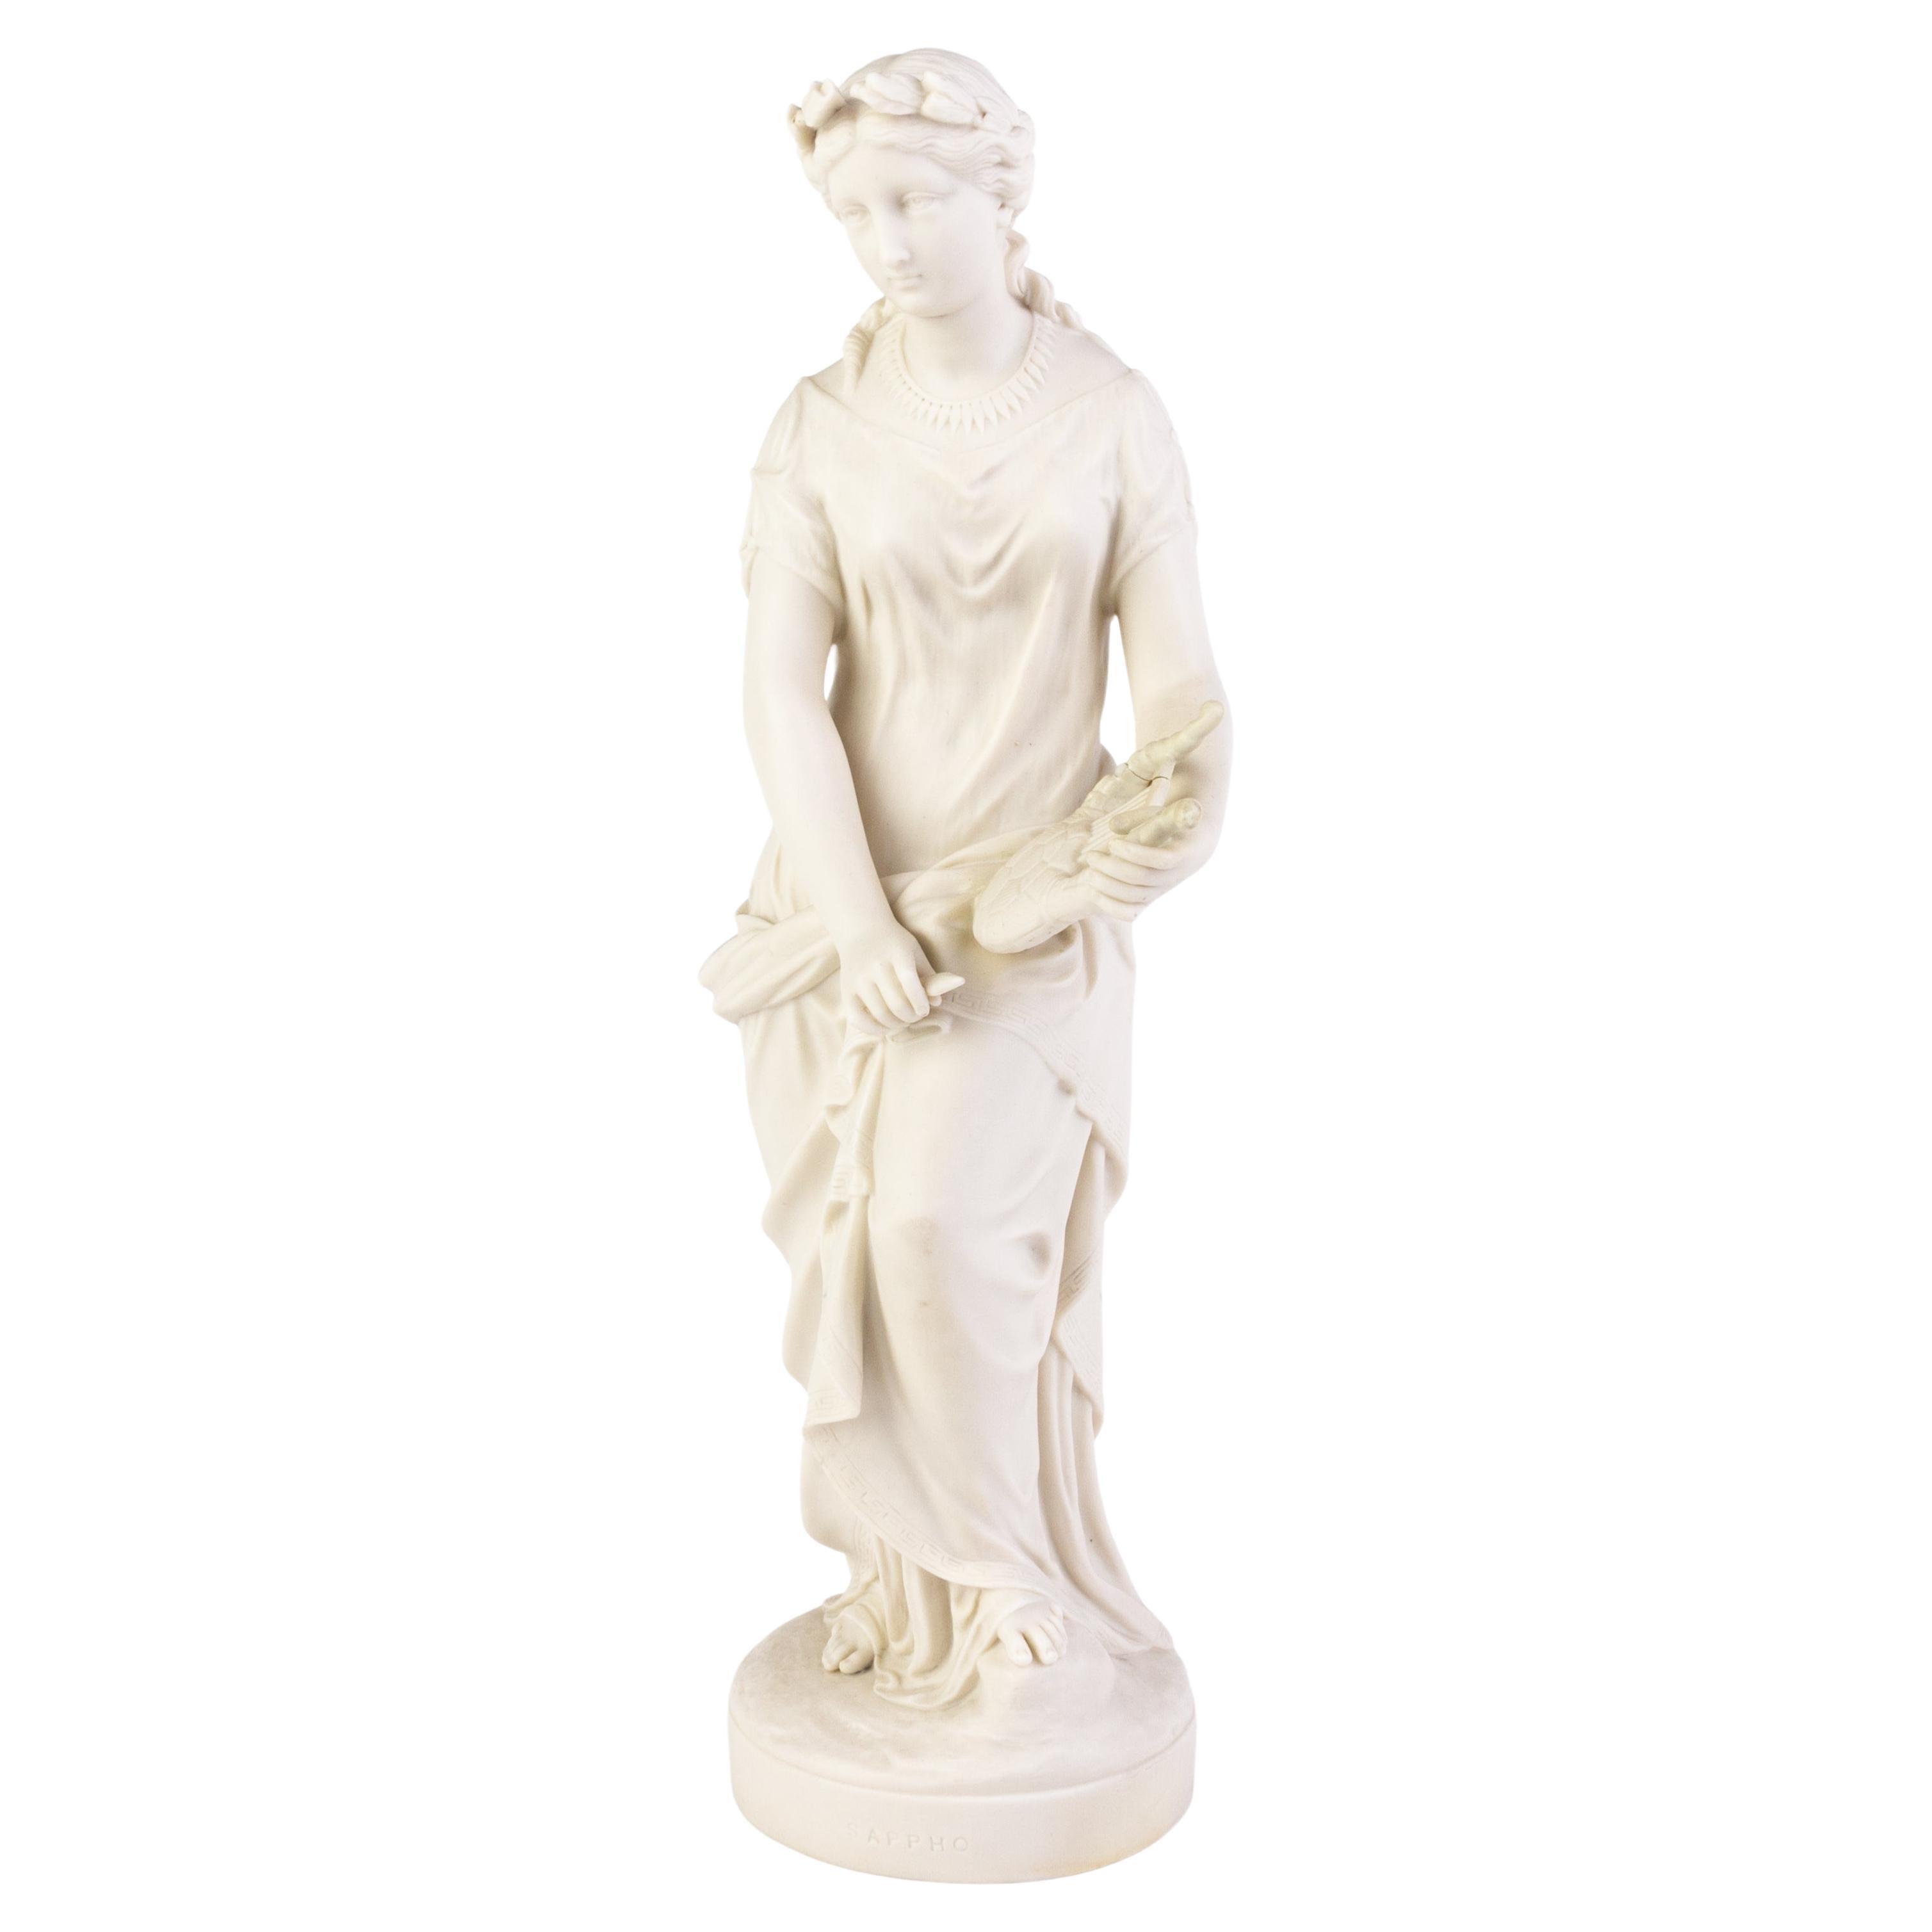 English Victorian Copeland Parian Ware Statue of Sappho the Poet 19th Century